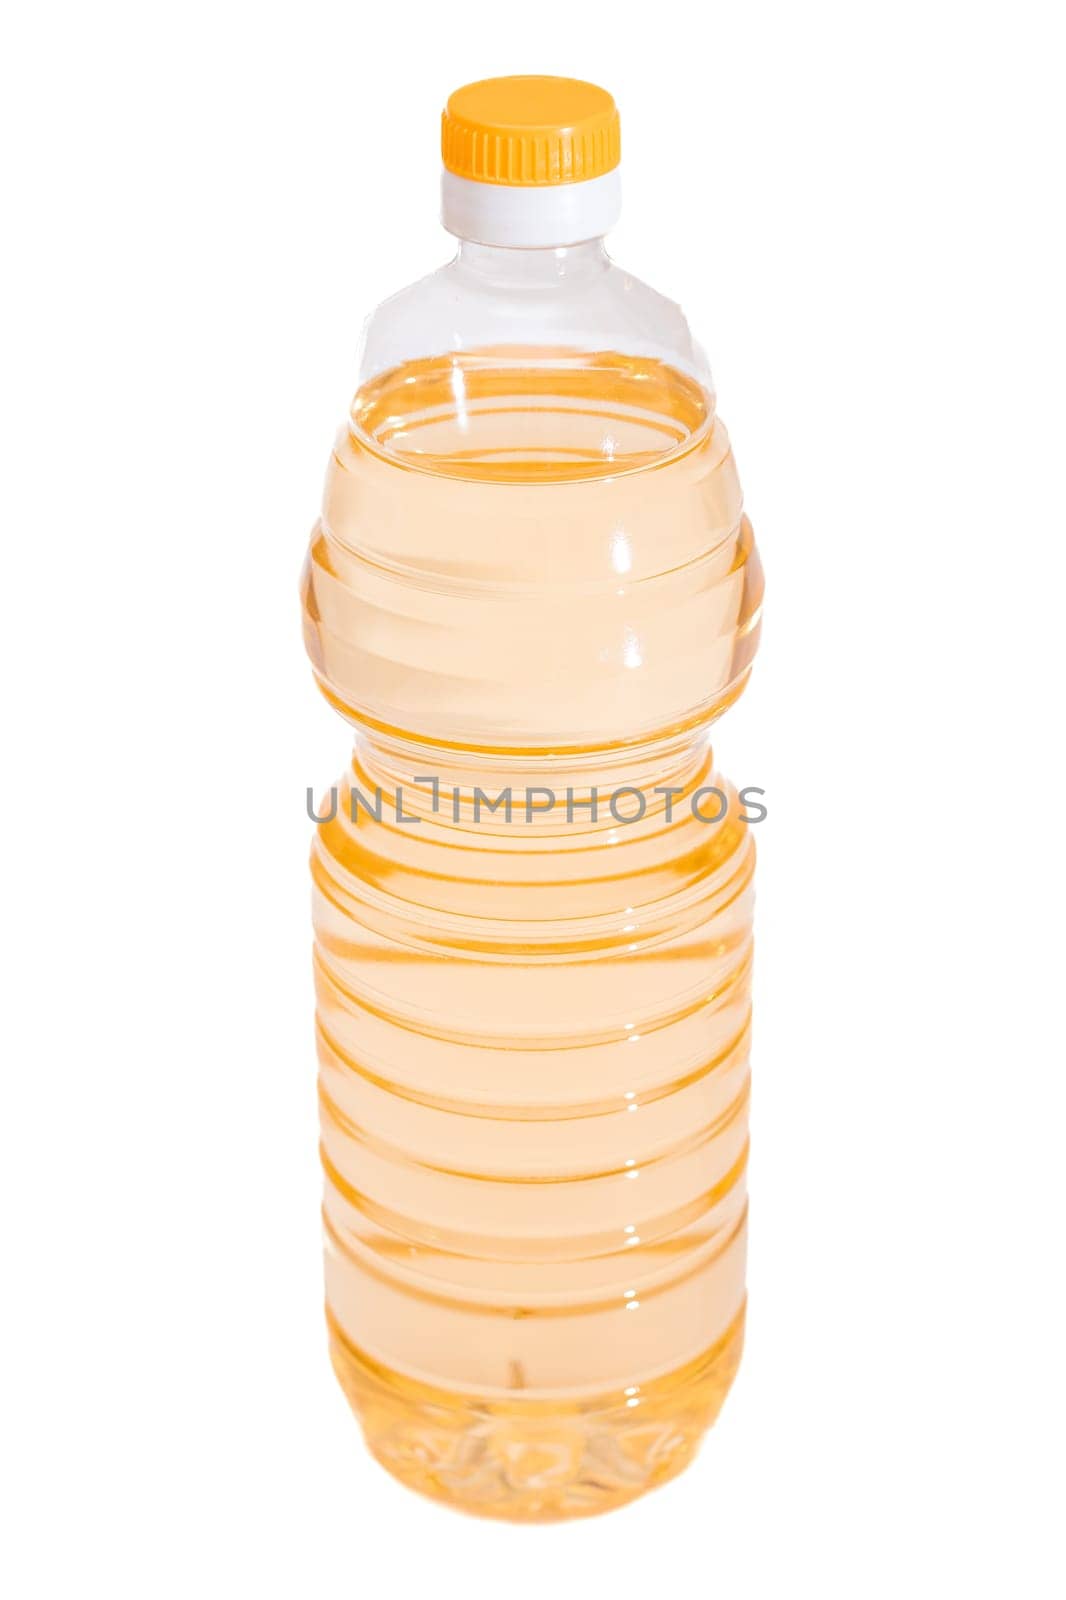 A Plastic Bottle of Sunflower Oil Isolated on White Background